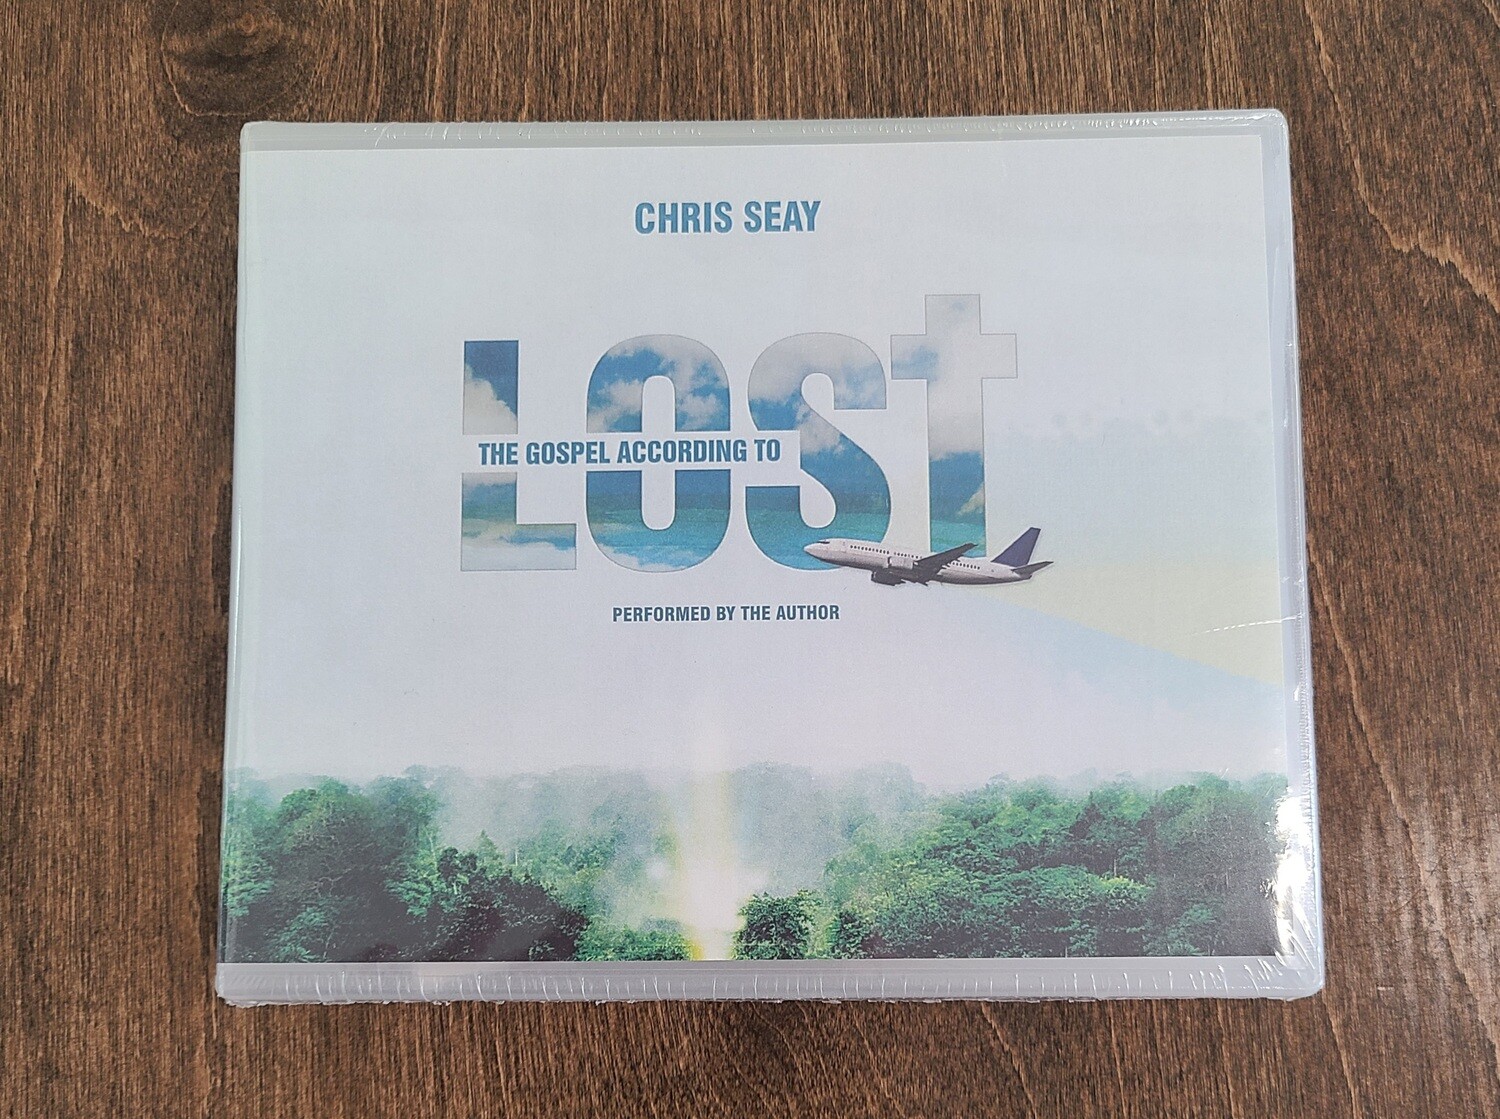 The Gospel According to Lost by Chris Seay